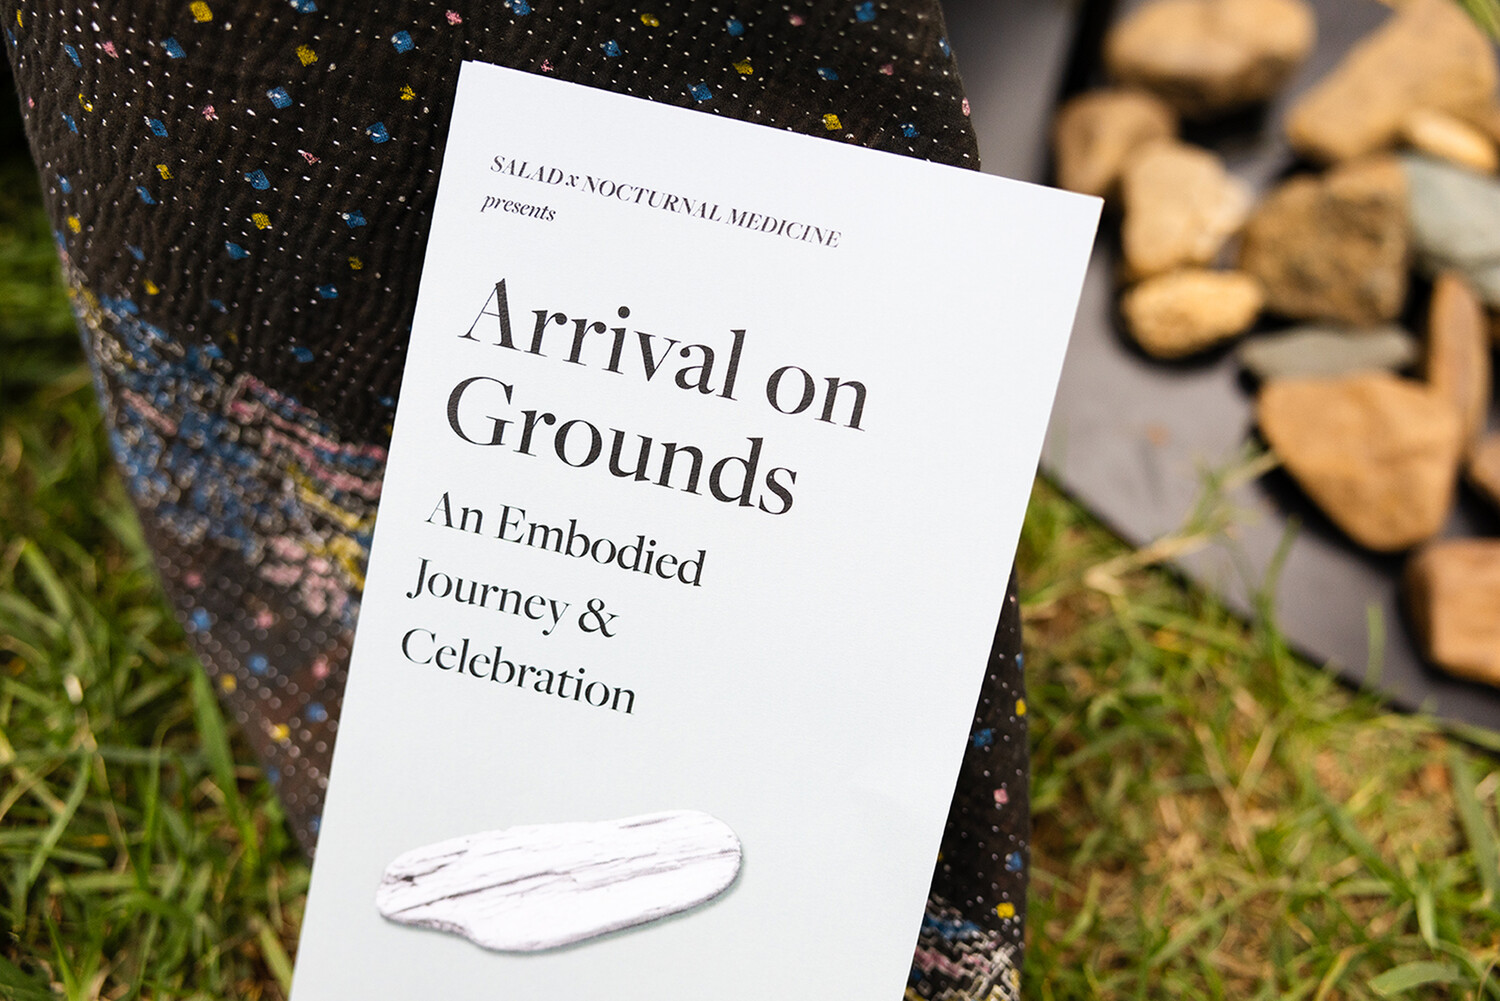 Arrival on Grounds: An Embodied Journey and Celebration by Tom Daly